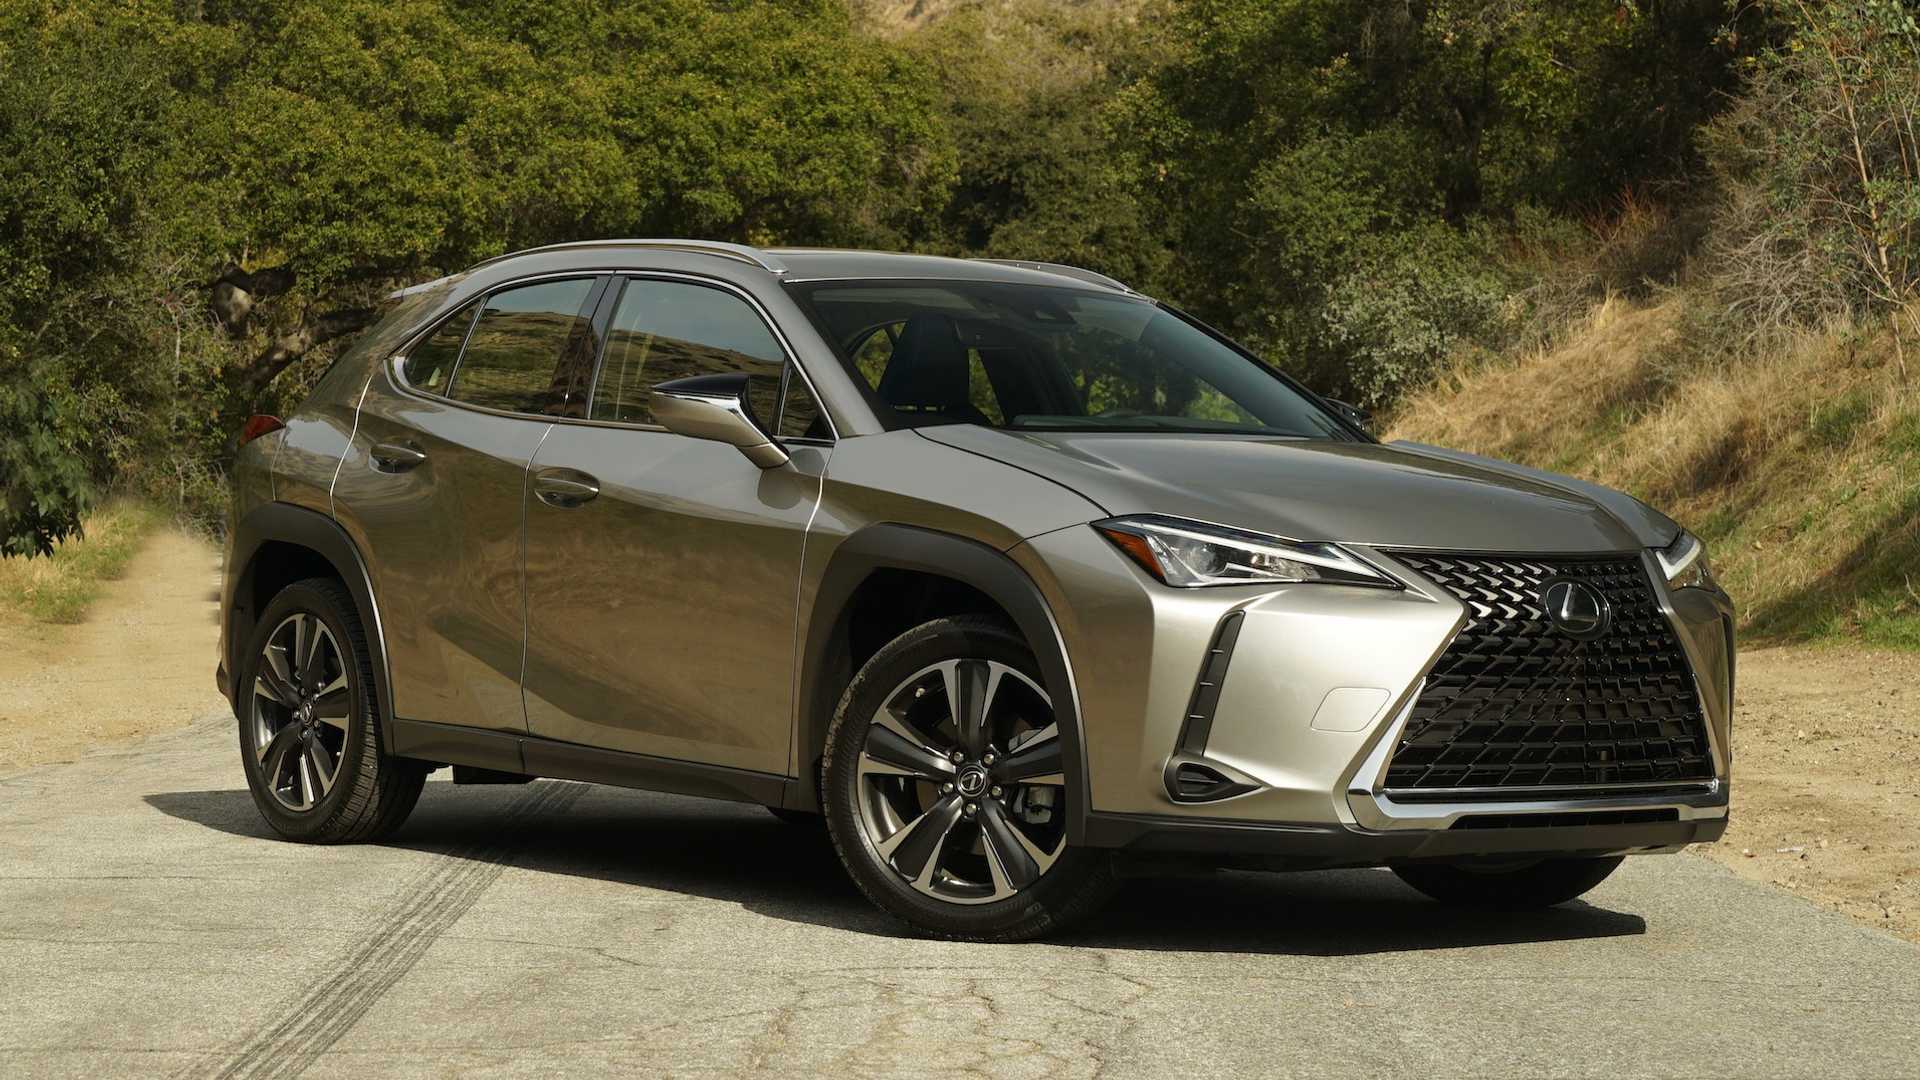 2019 Lexus UX 200 Review: Excels At Entry Level